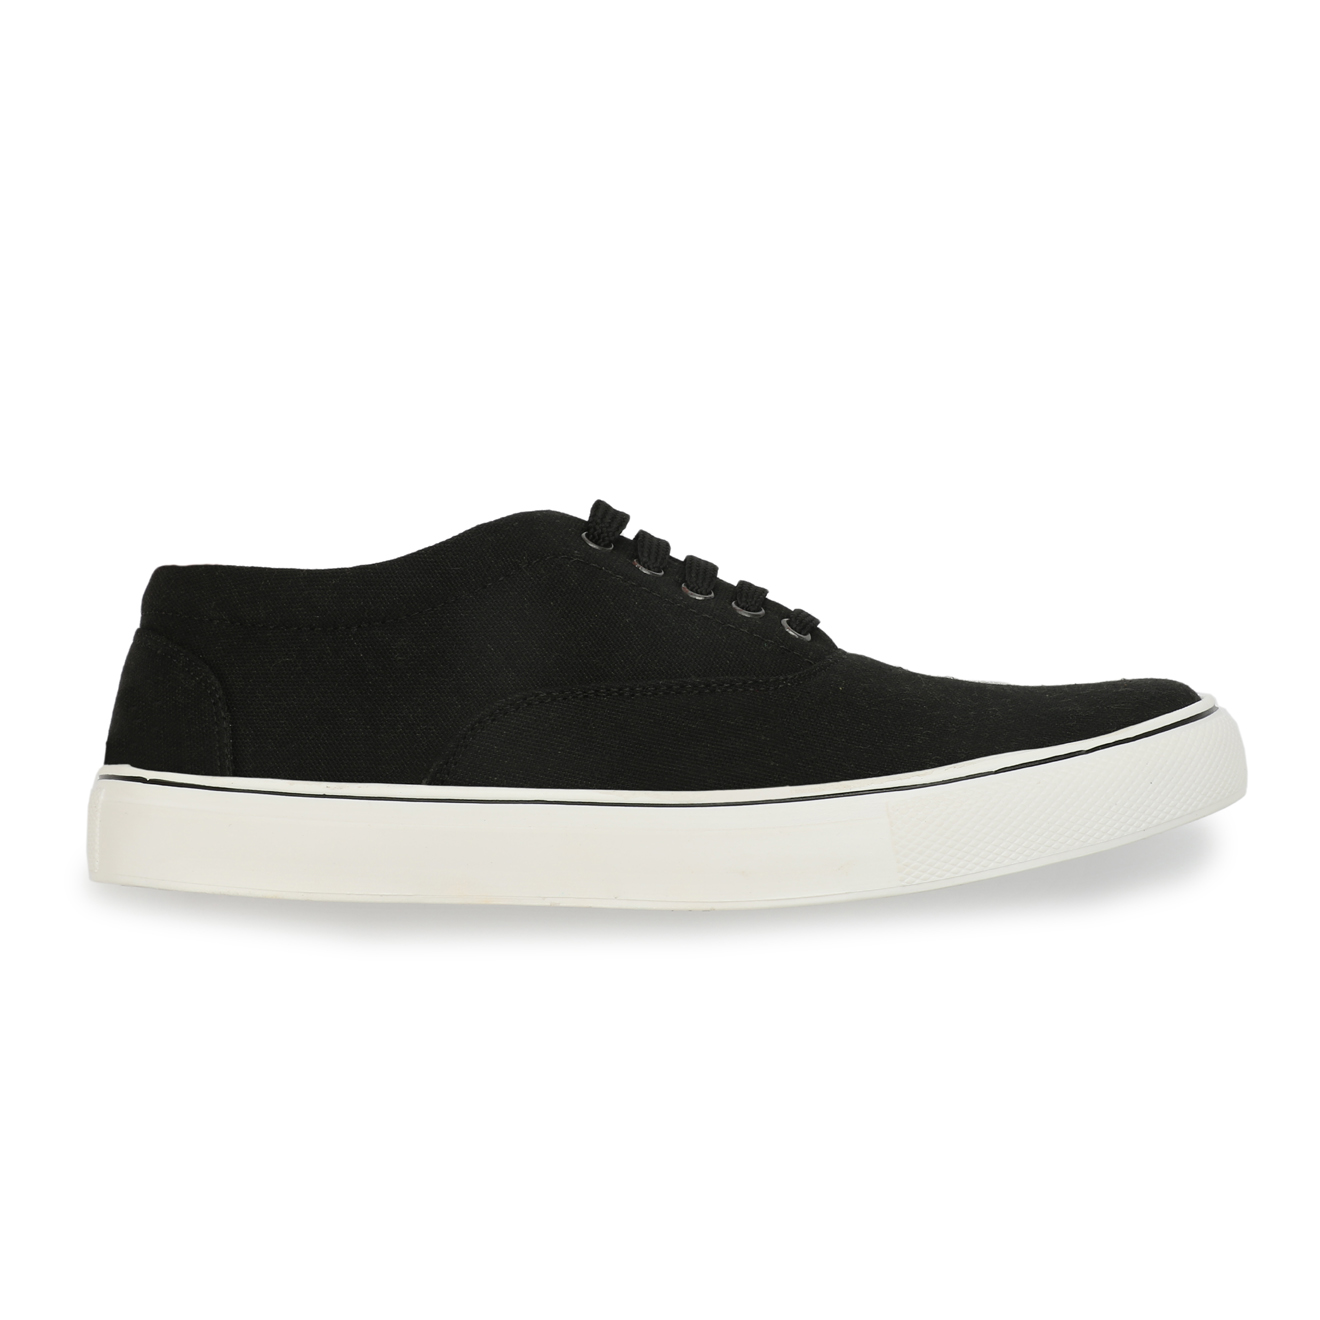 Buy Men's Black & White Lace-up Sneakers Online @ ₹499 from ShopClues